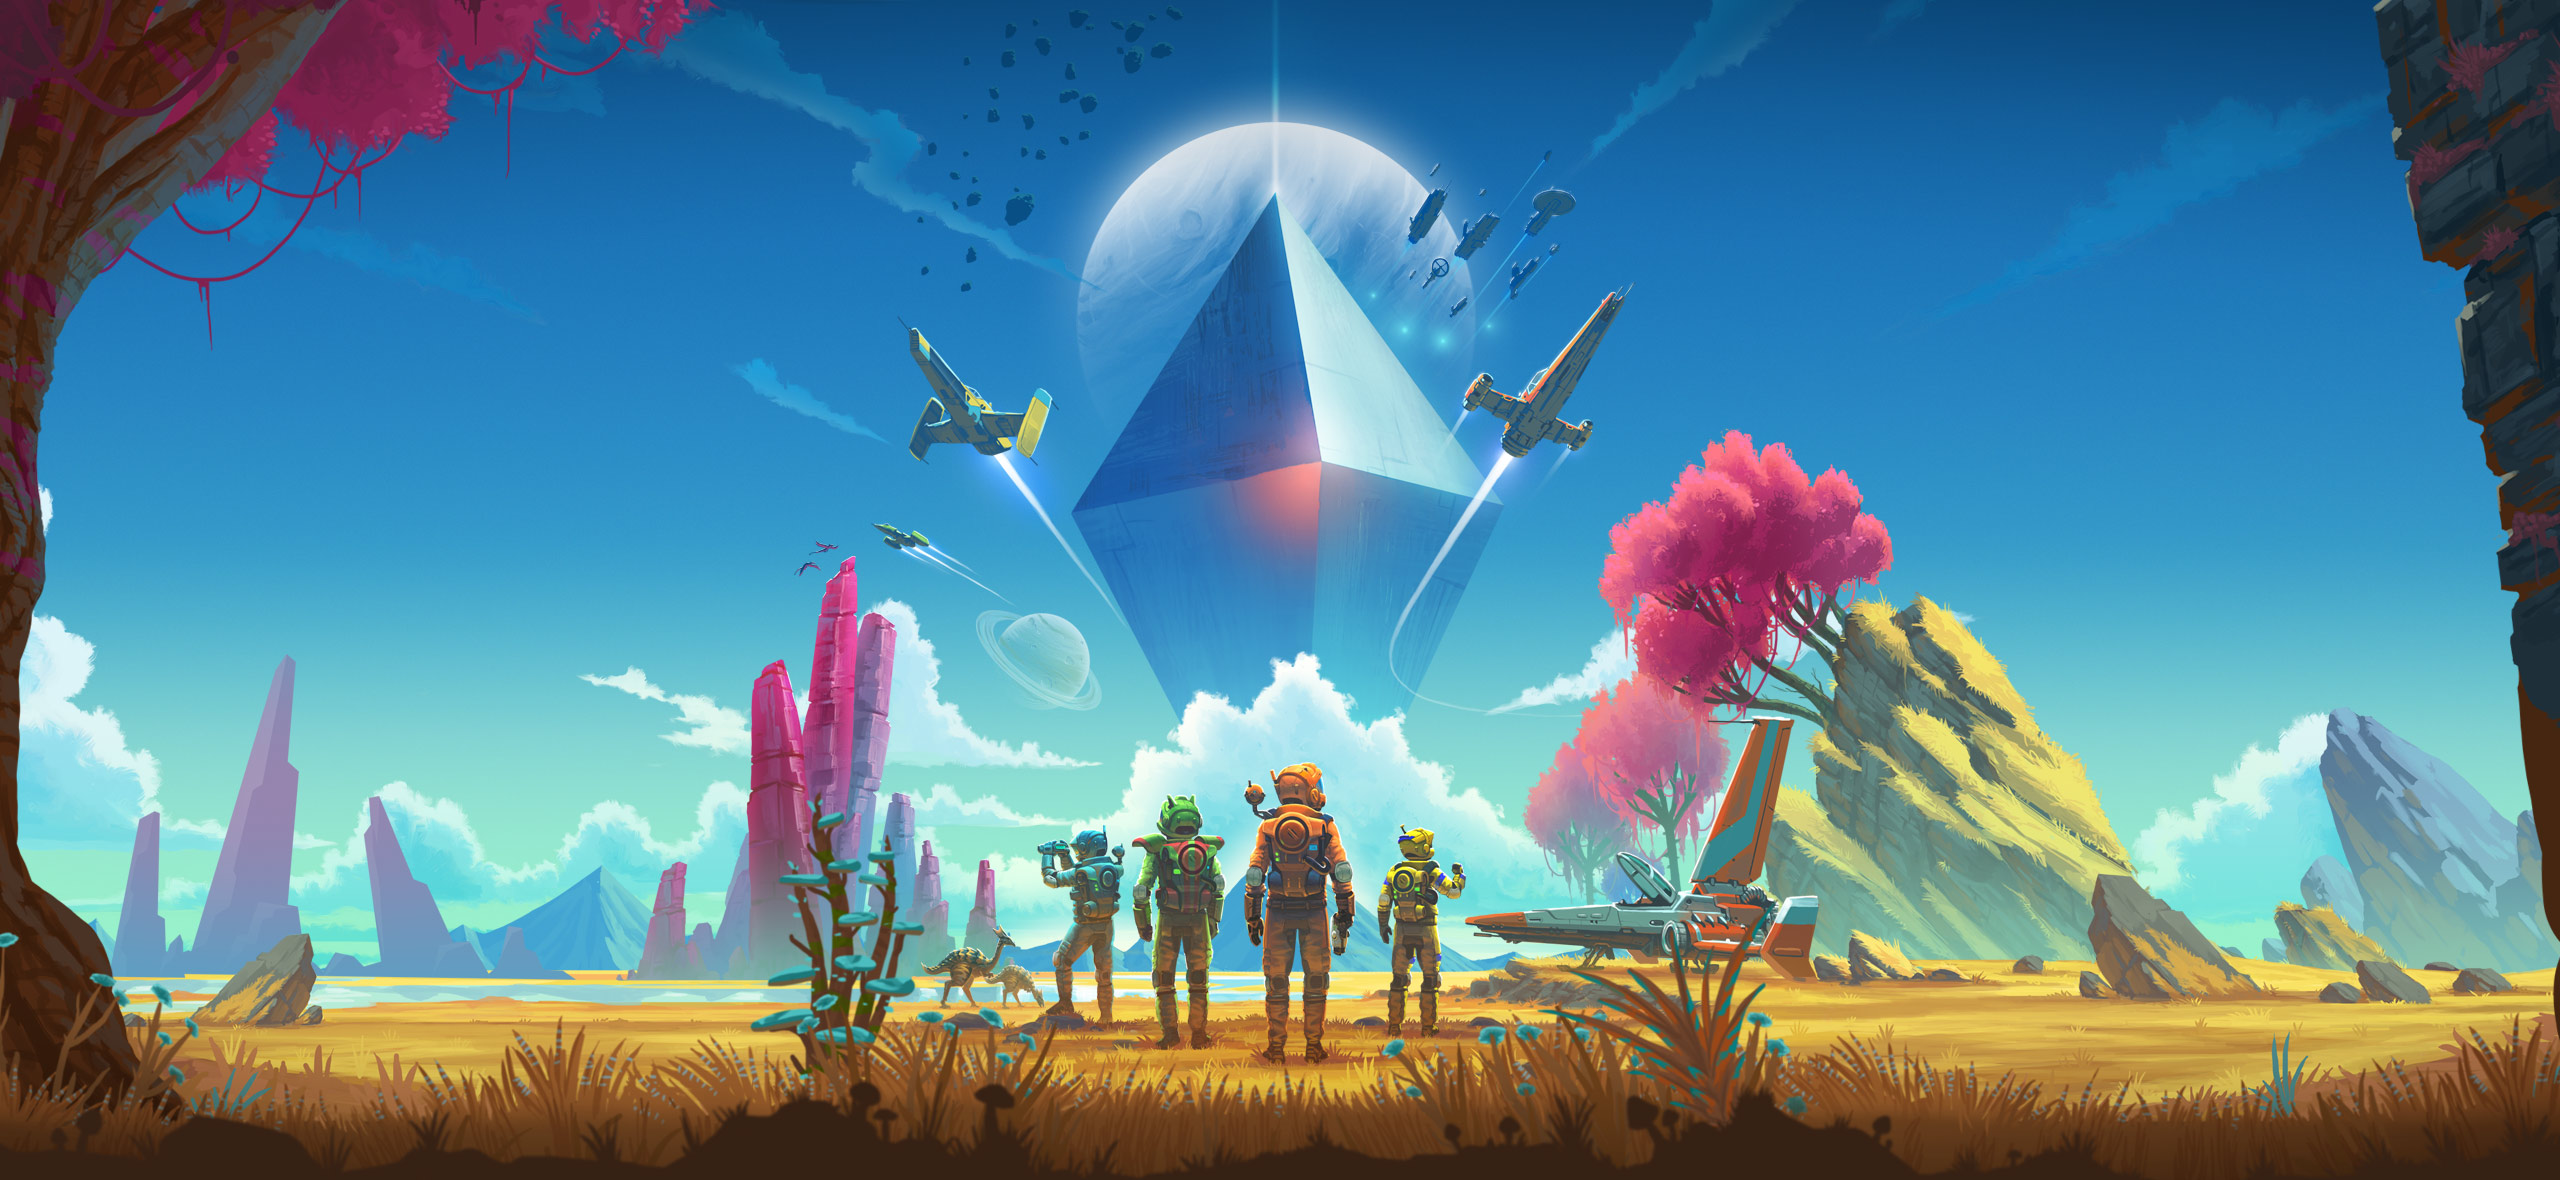 No Mans Sky Update 4.31 Patch Notes